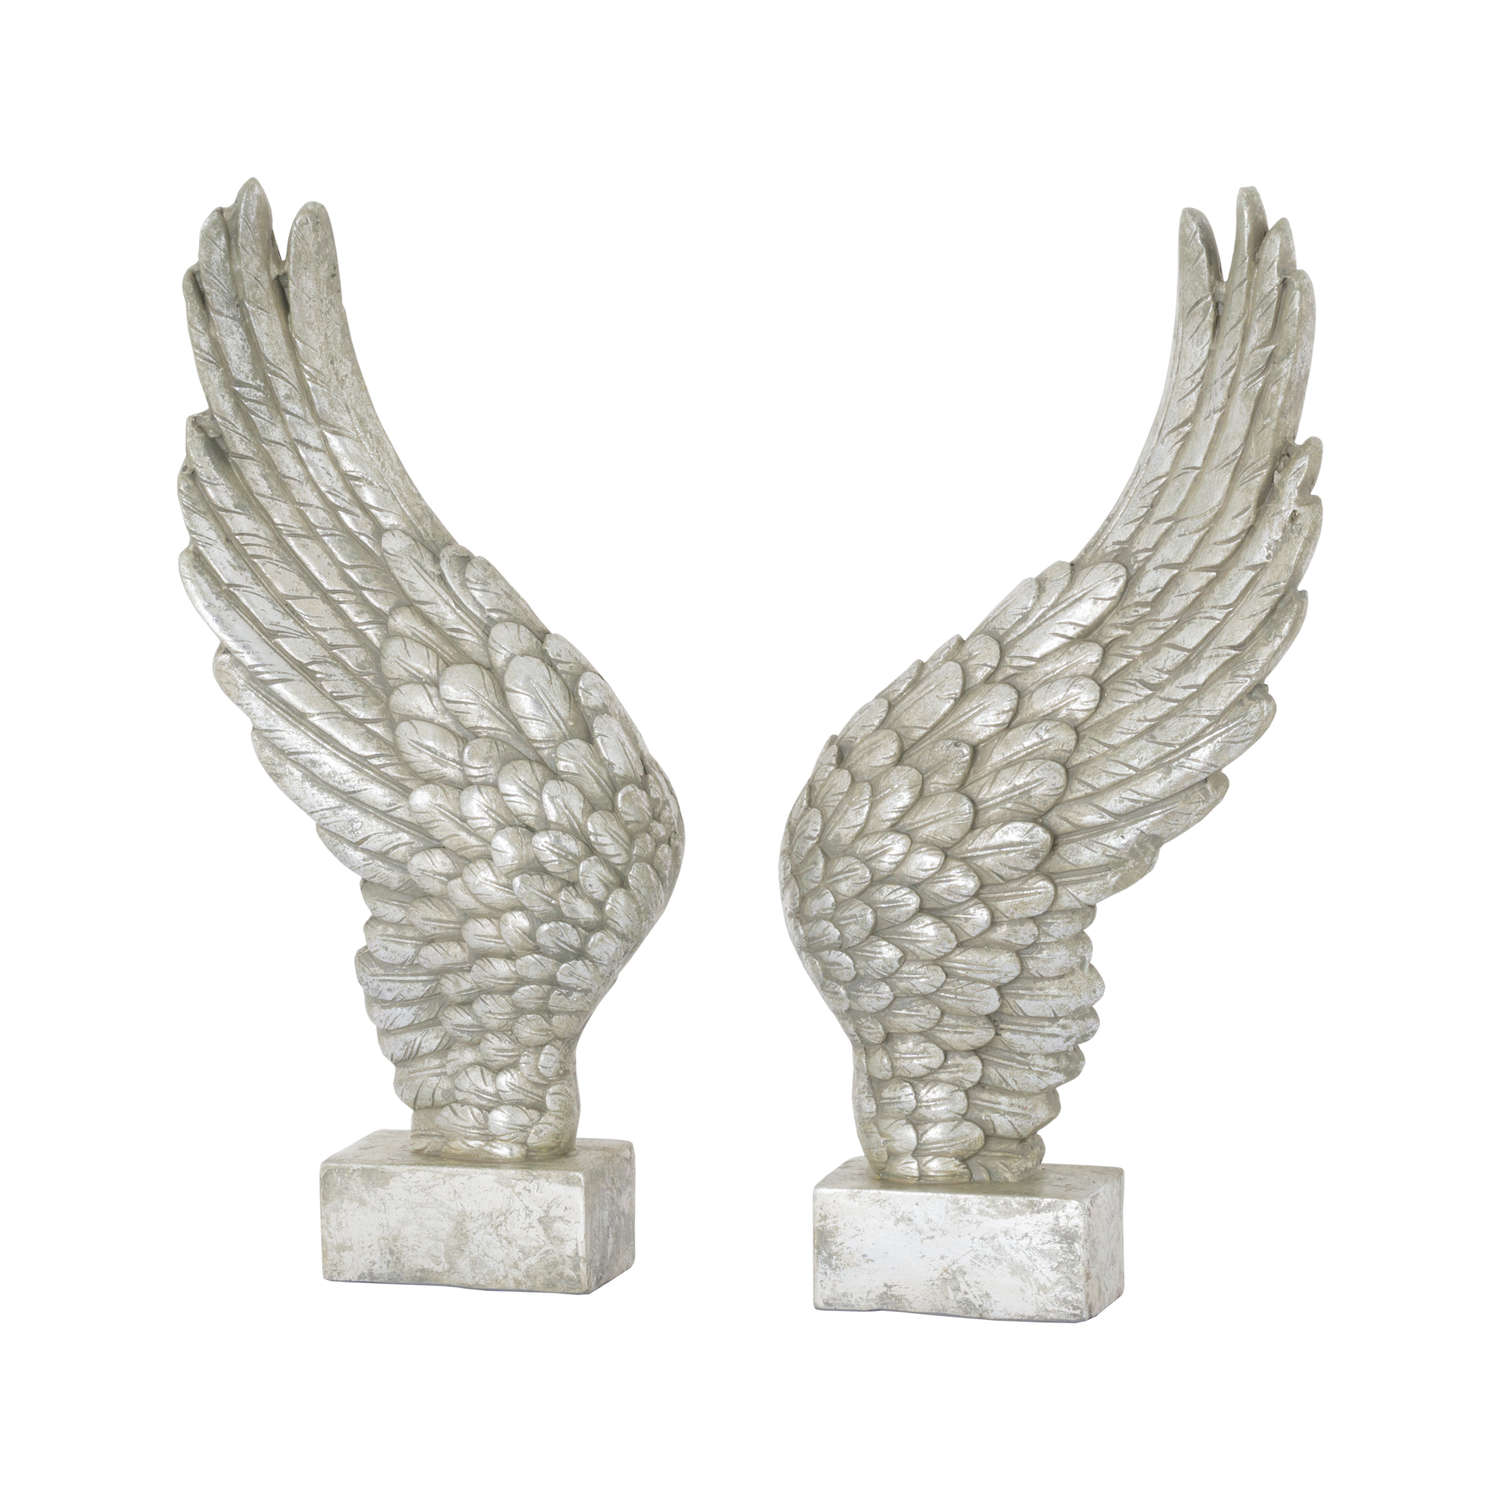 View Large Freestanding Antique Silver Angel Wings Ornament information